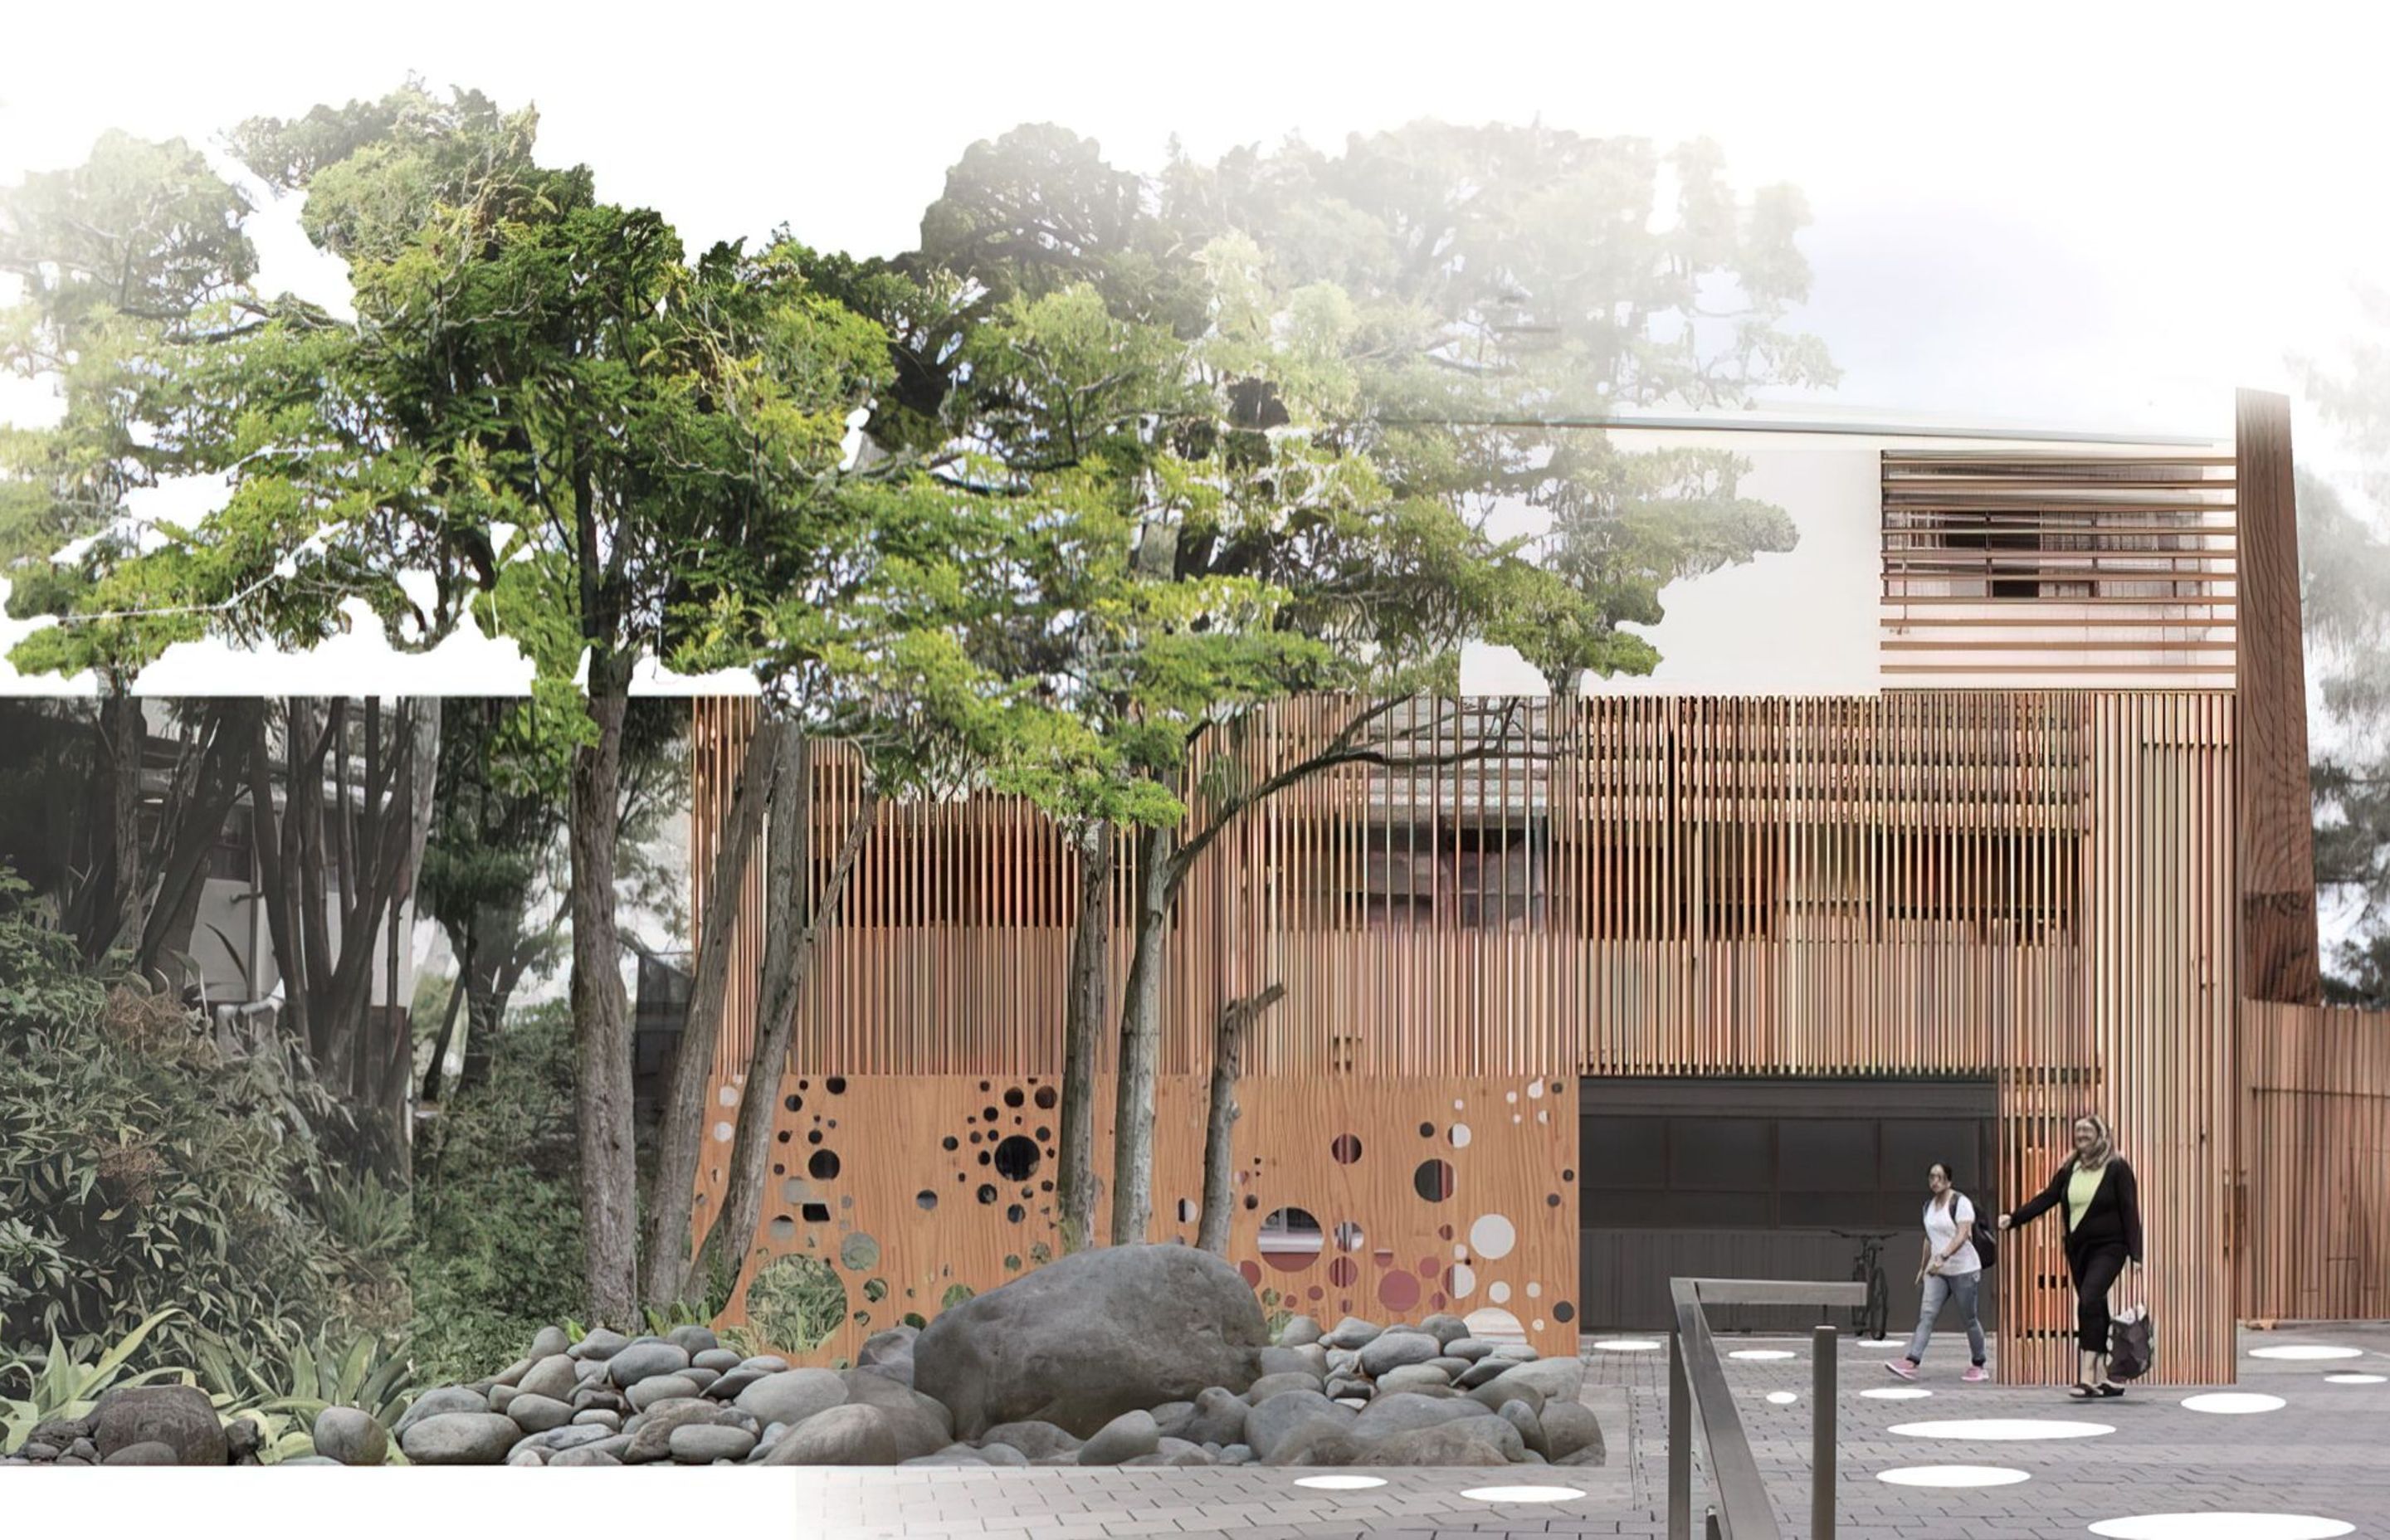 Many of the projects Peter has been working on with his firm recently have been focused on weathertightness and creating healthy environments for schools and community buildings. | Concept for University of Waikato Block AG entrance foyer upgrade